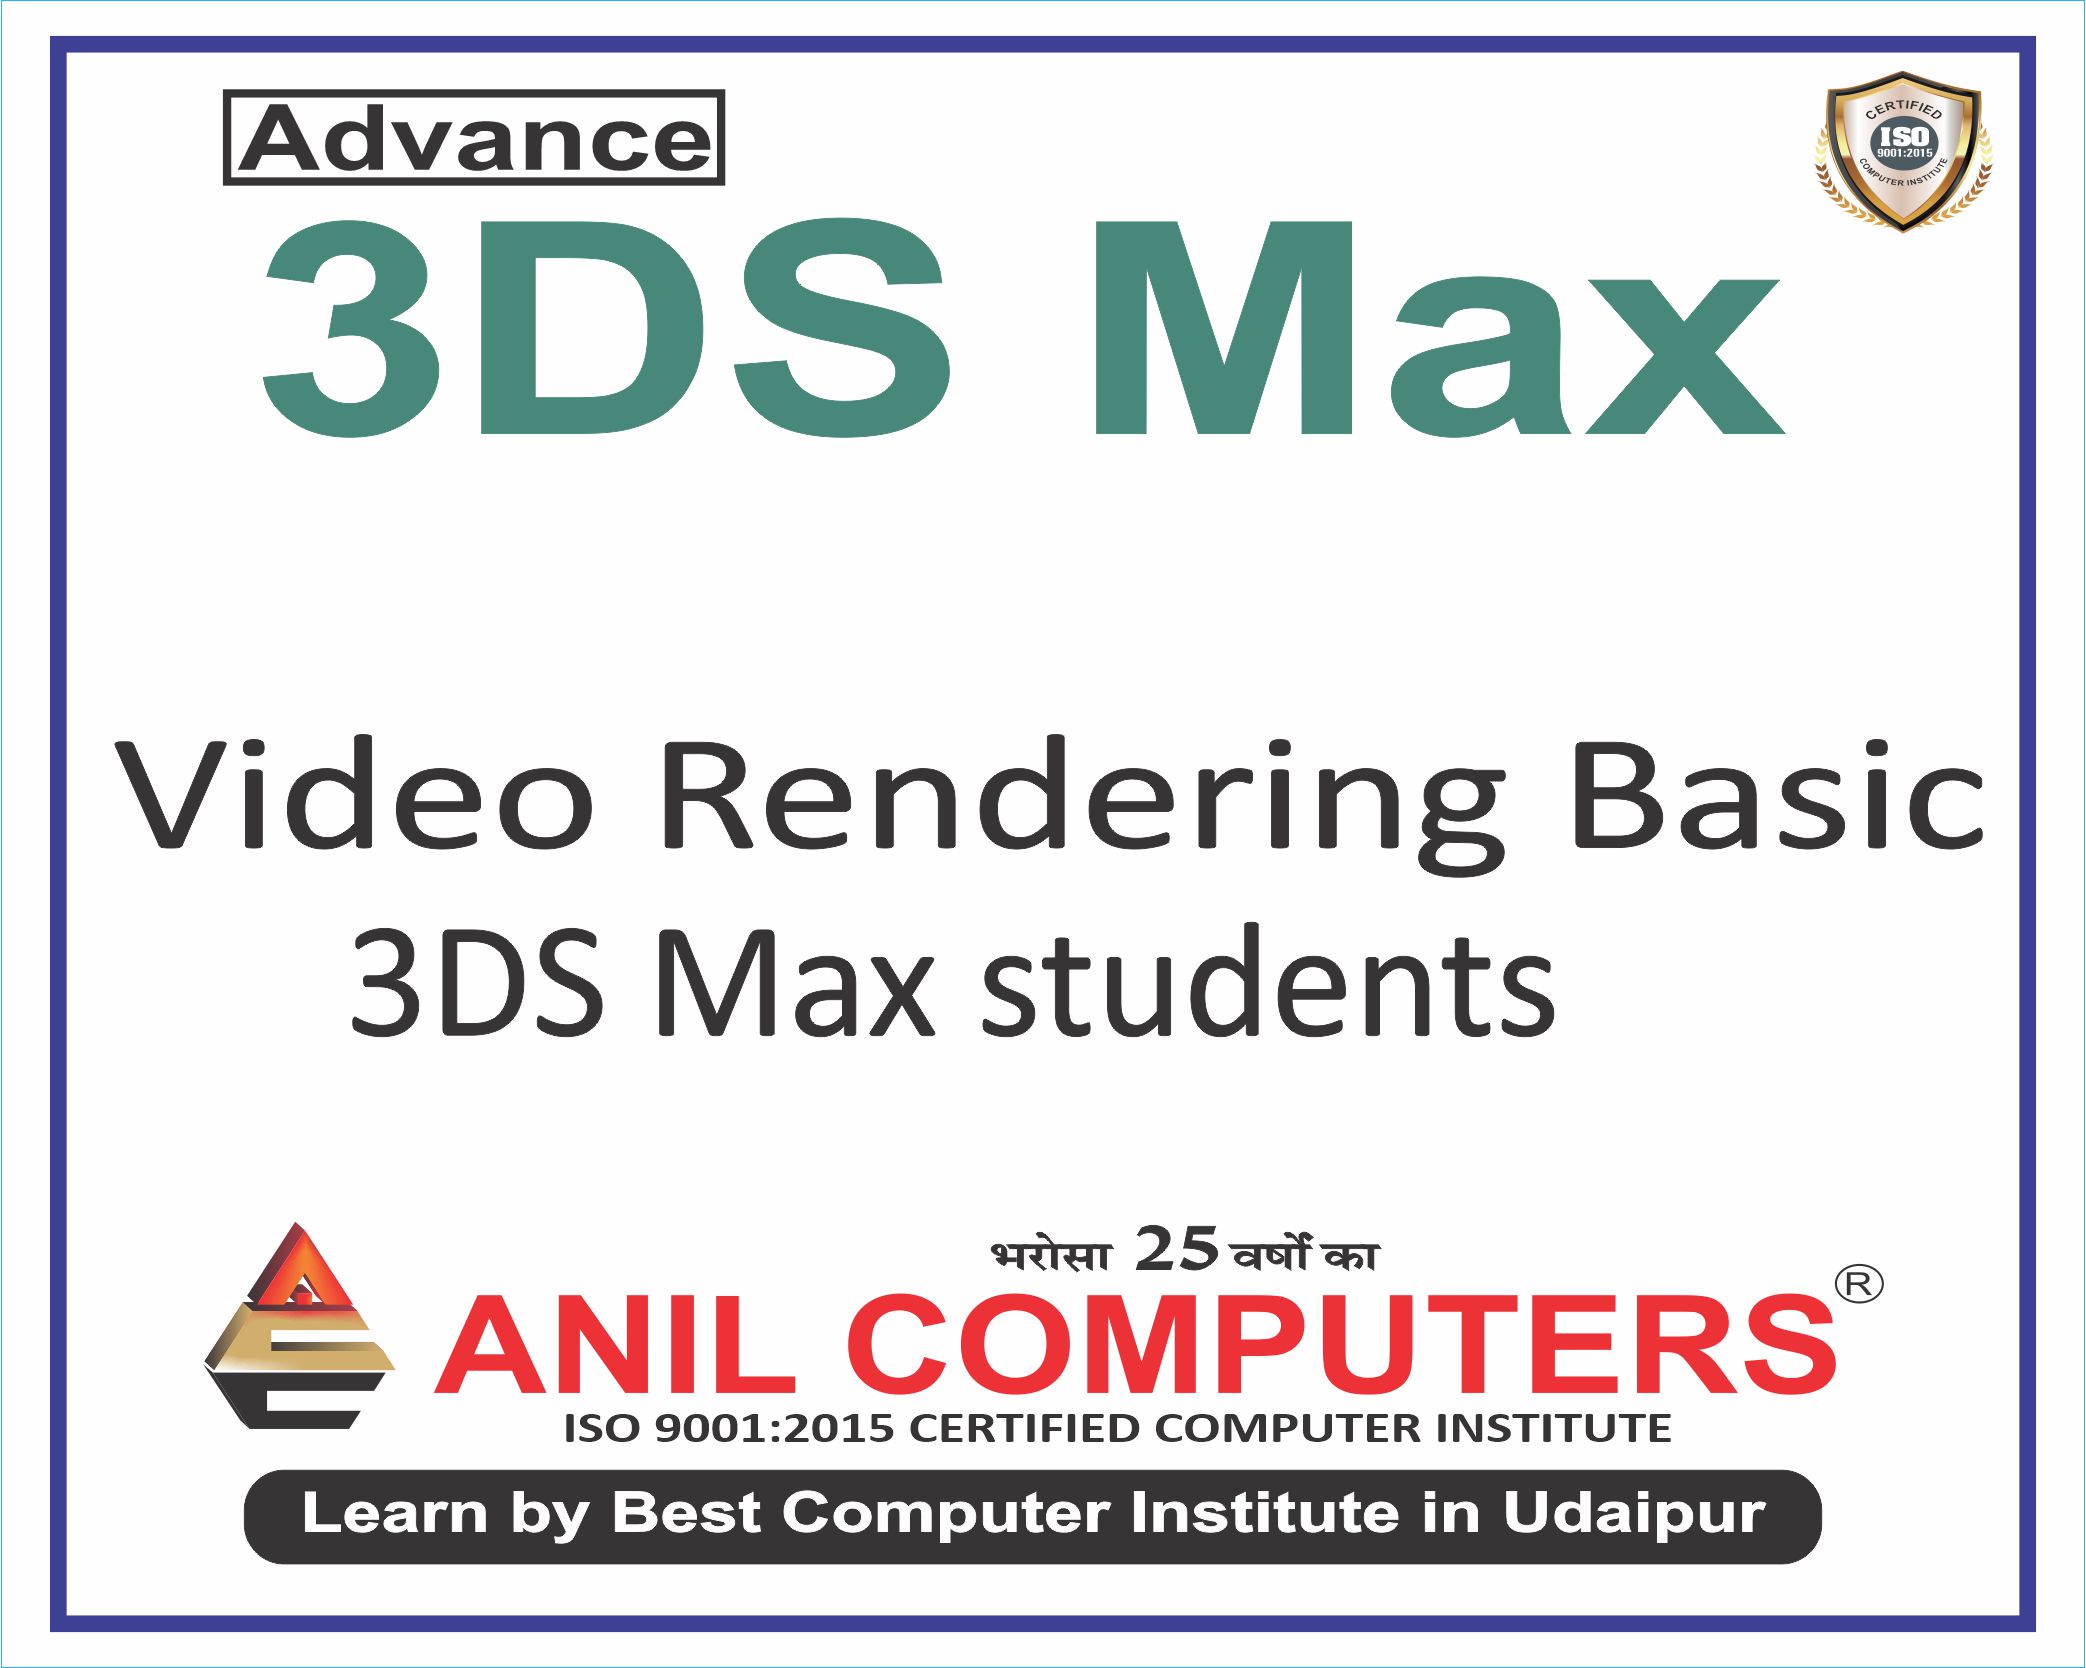 Video Rendering Basic for 3DS Max students